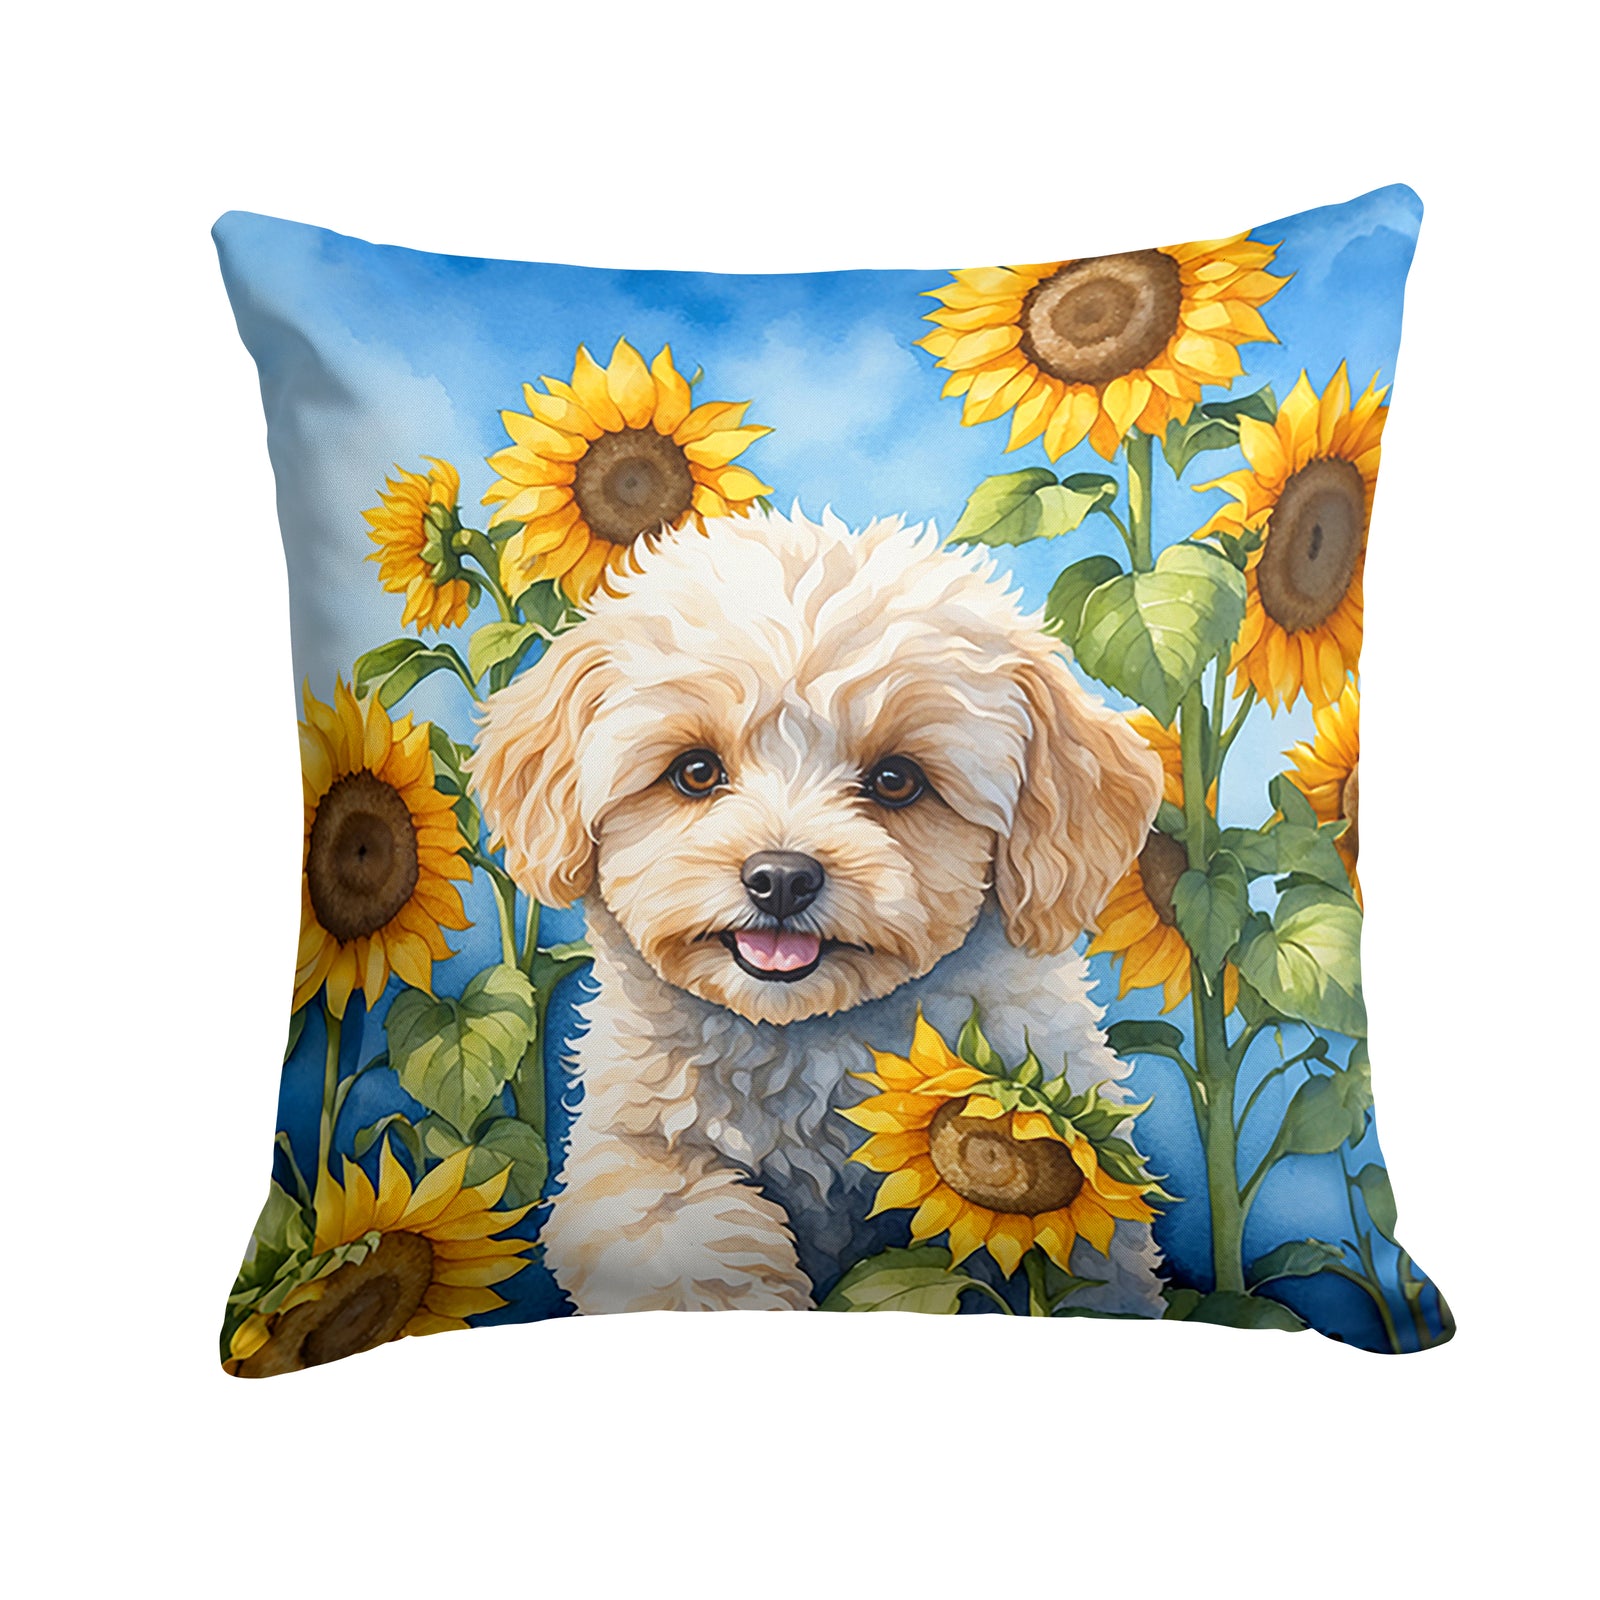 Buy this Maltipoo in Sunflowers Throw Pillow